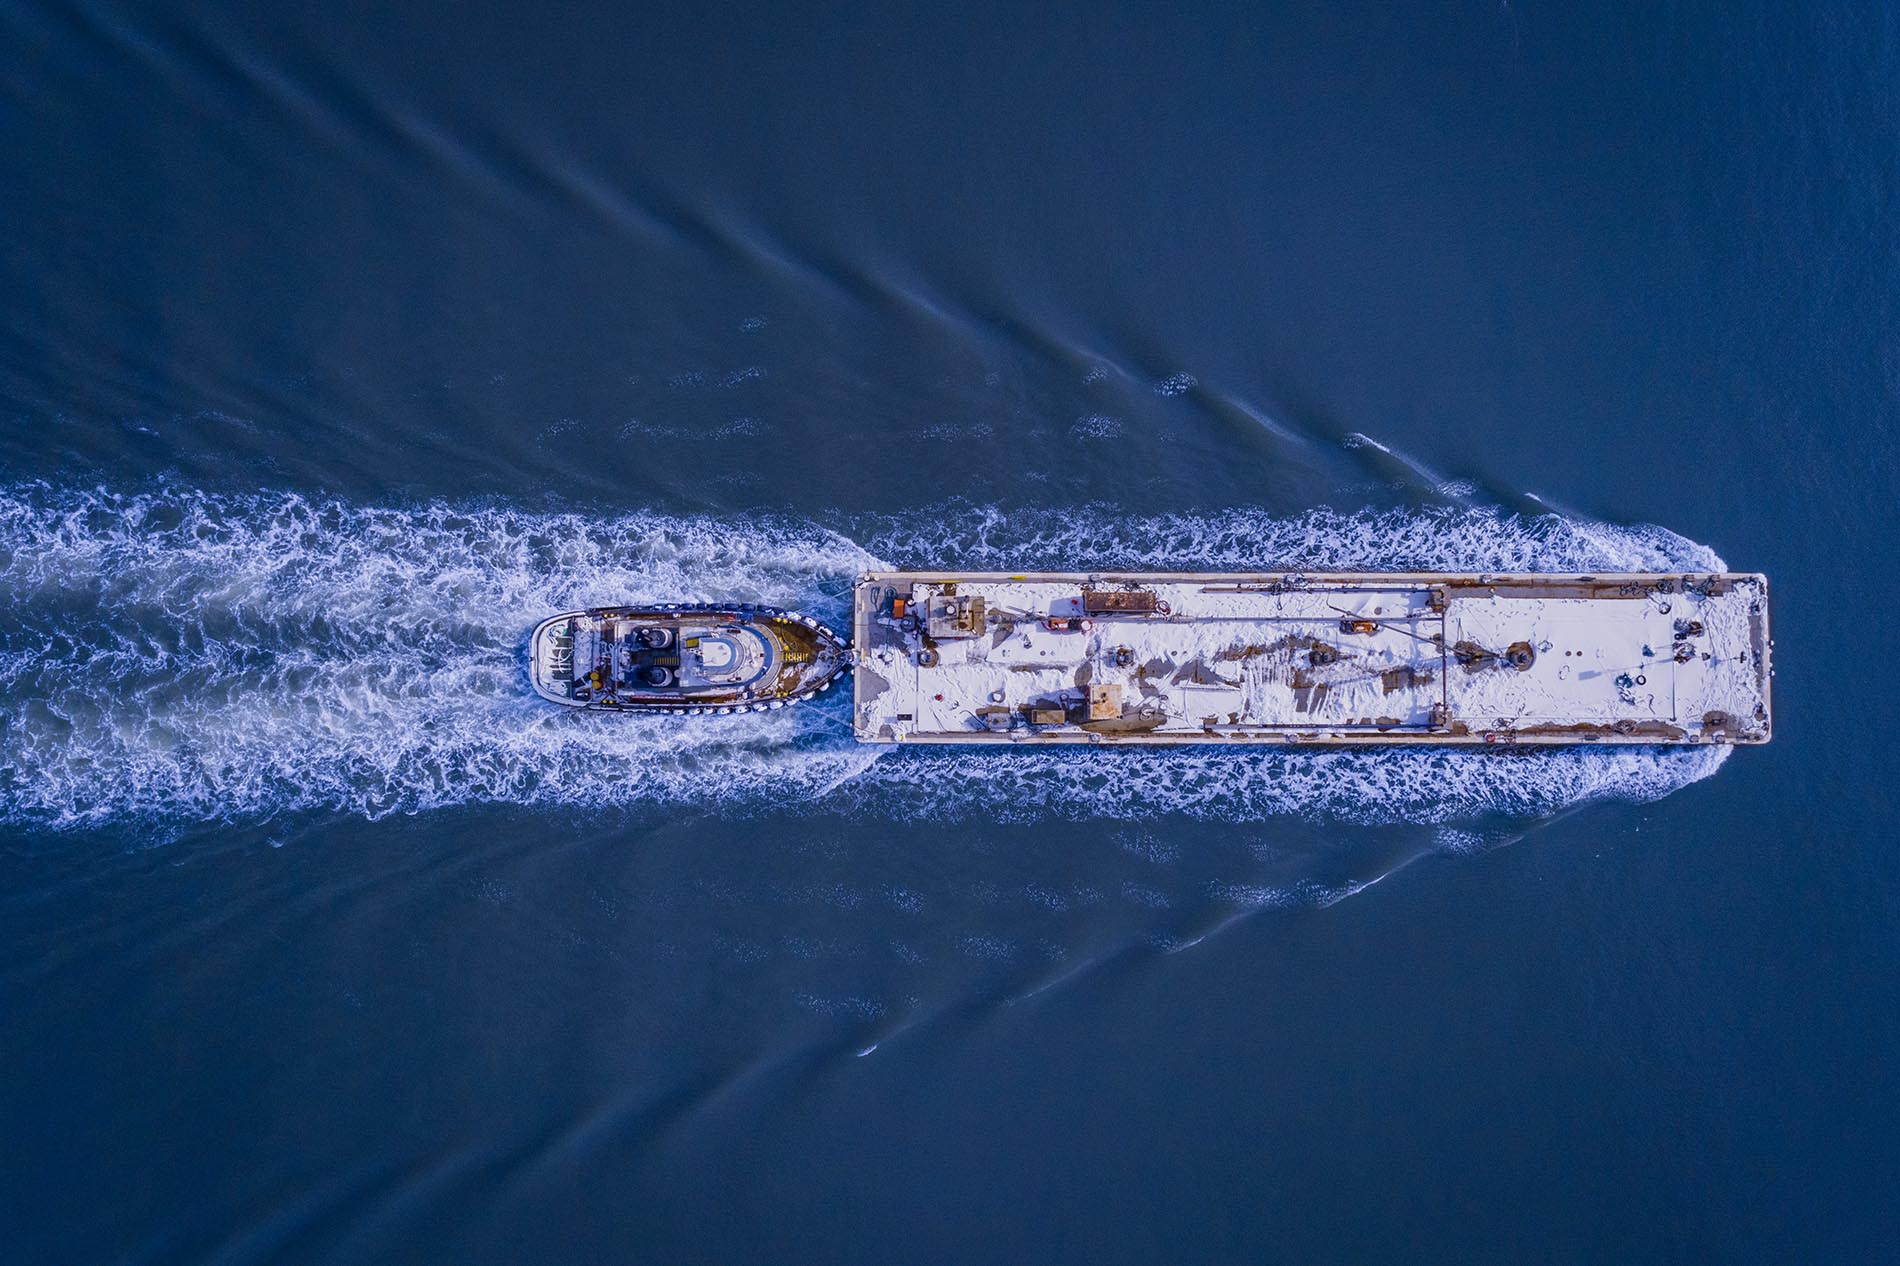 Drone Photograph Nadir angle of a barge going up the Arthur Kill Waterway in New Jersey